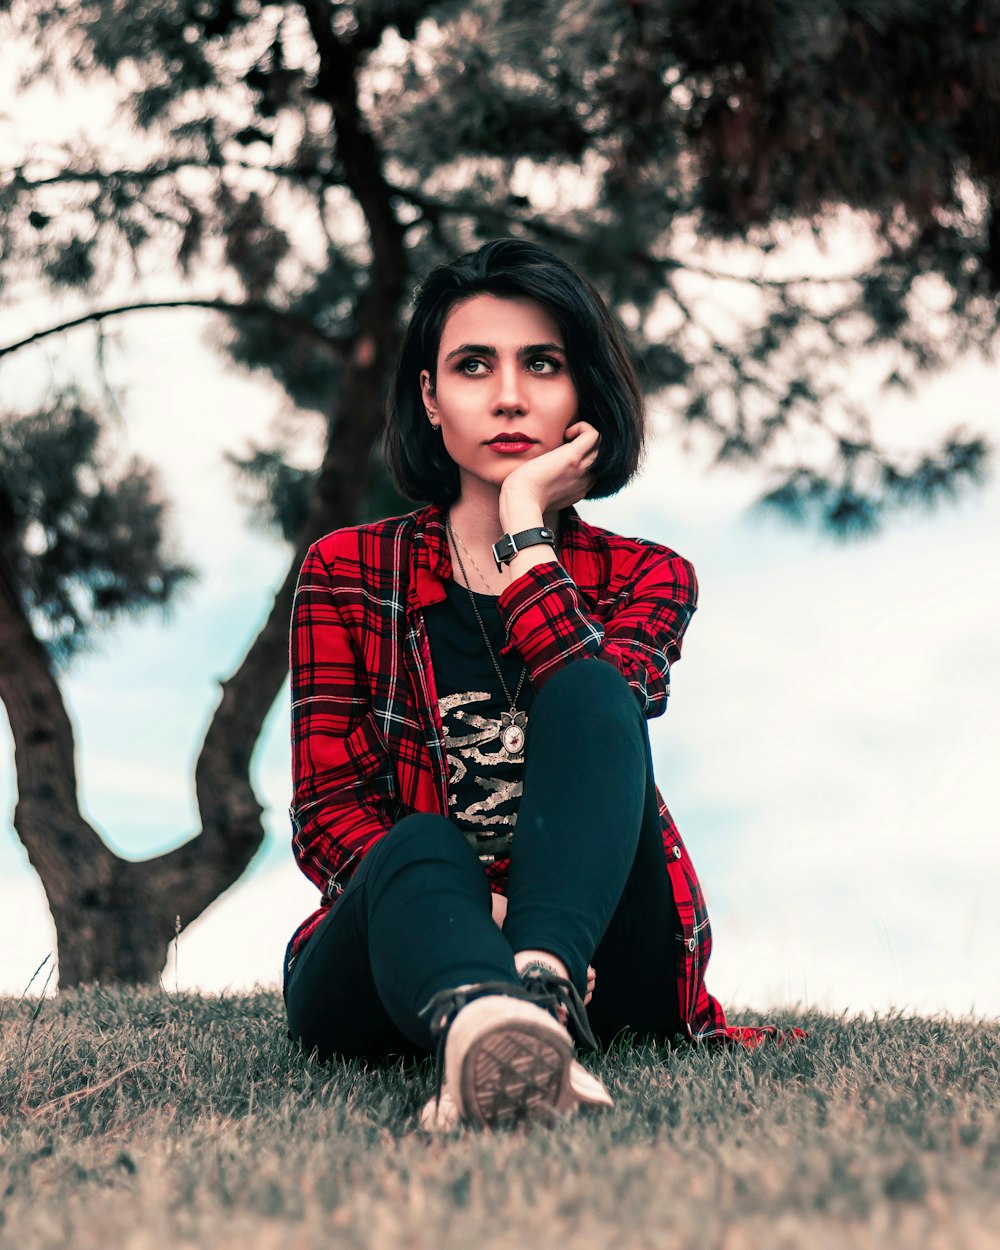 woman in red and black plaid dress shirt and black pants sitting on grass field